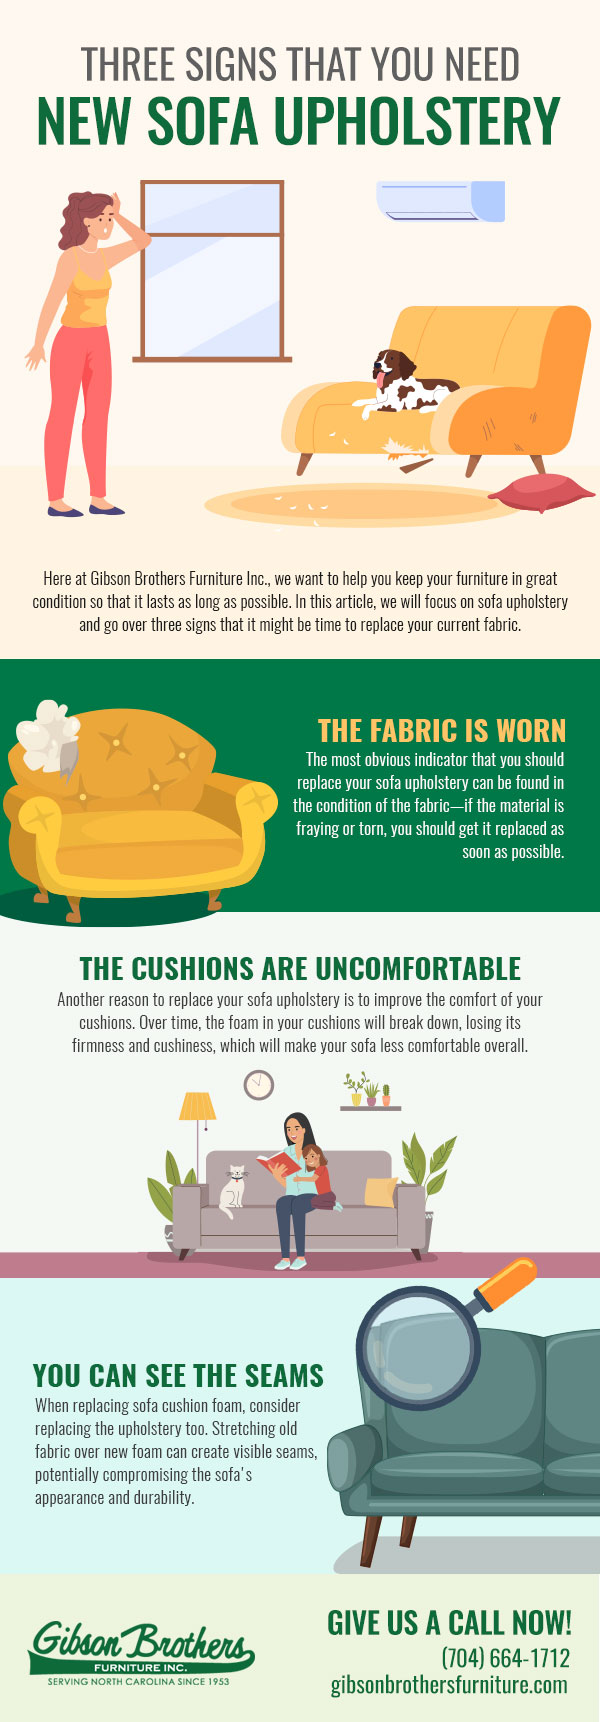 Three Signs That You Need New Sofa Upholstery 